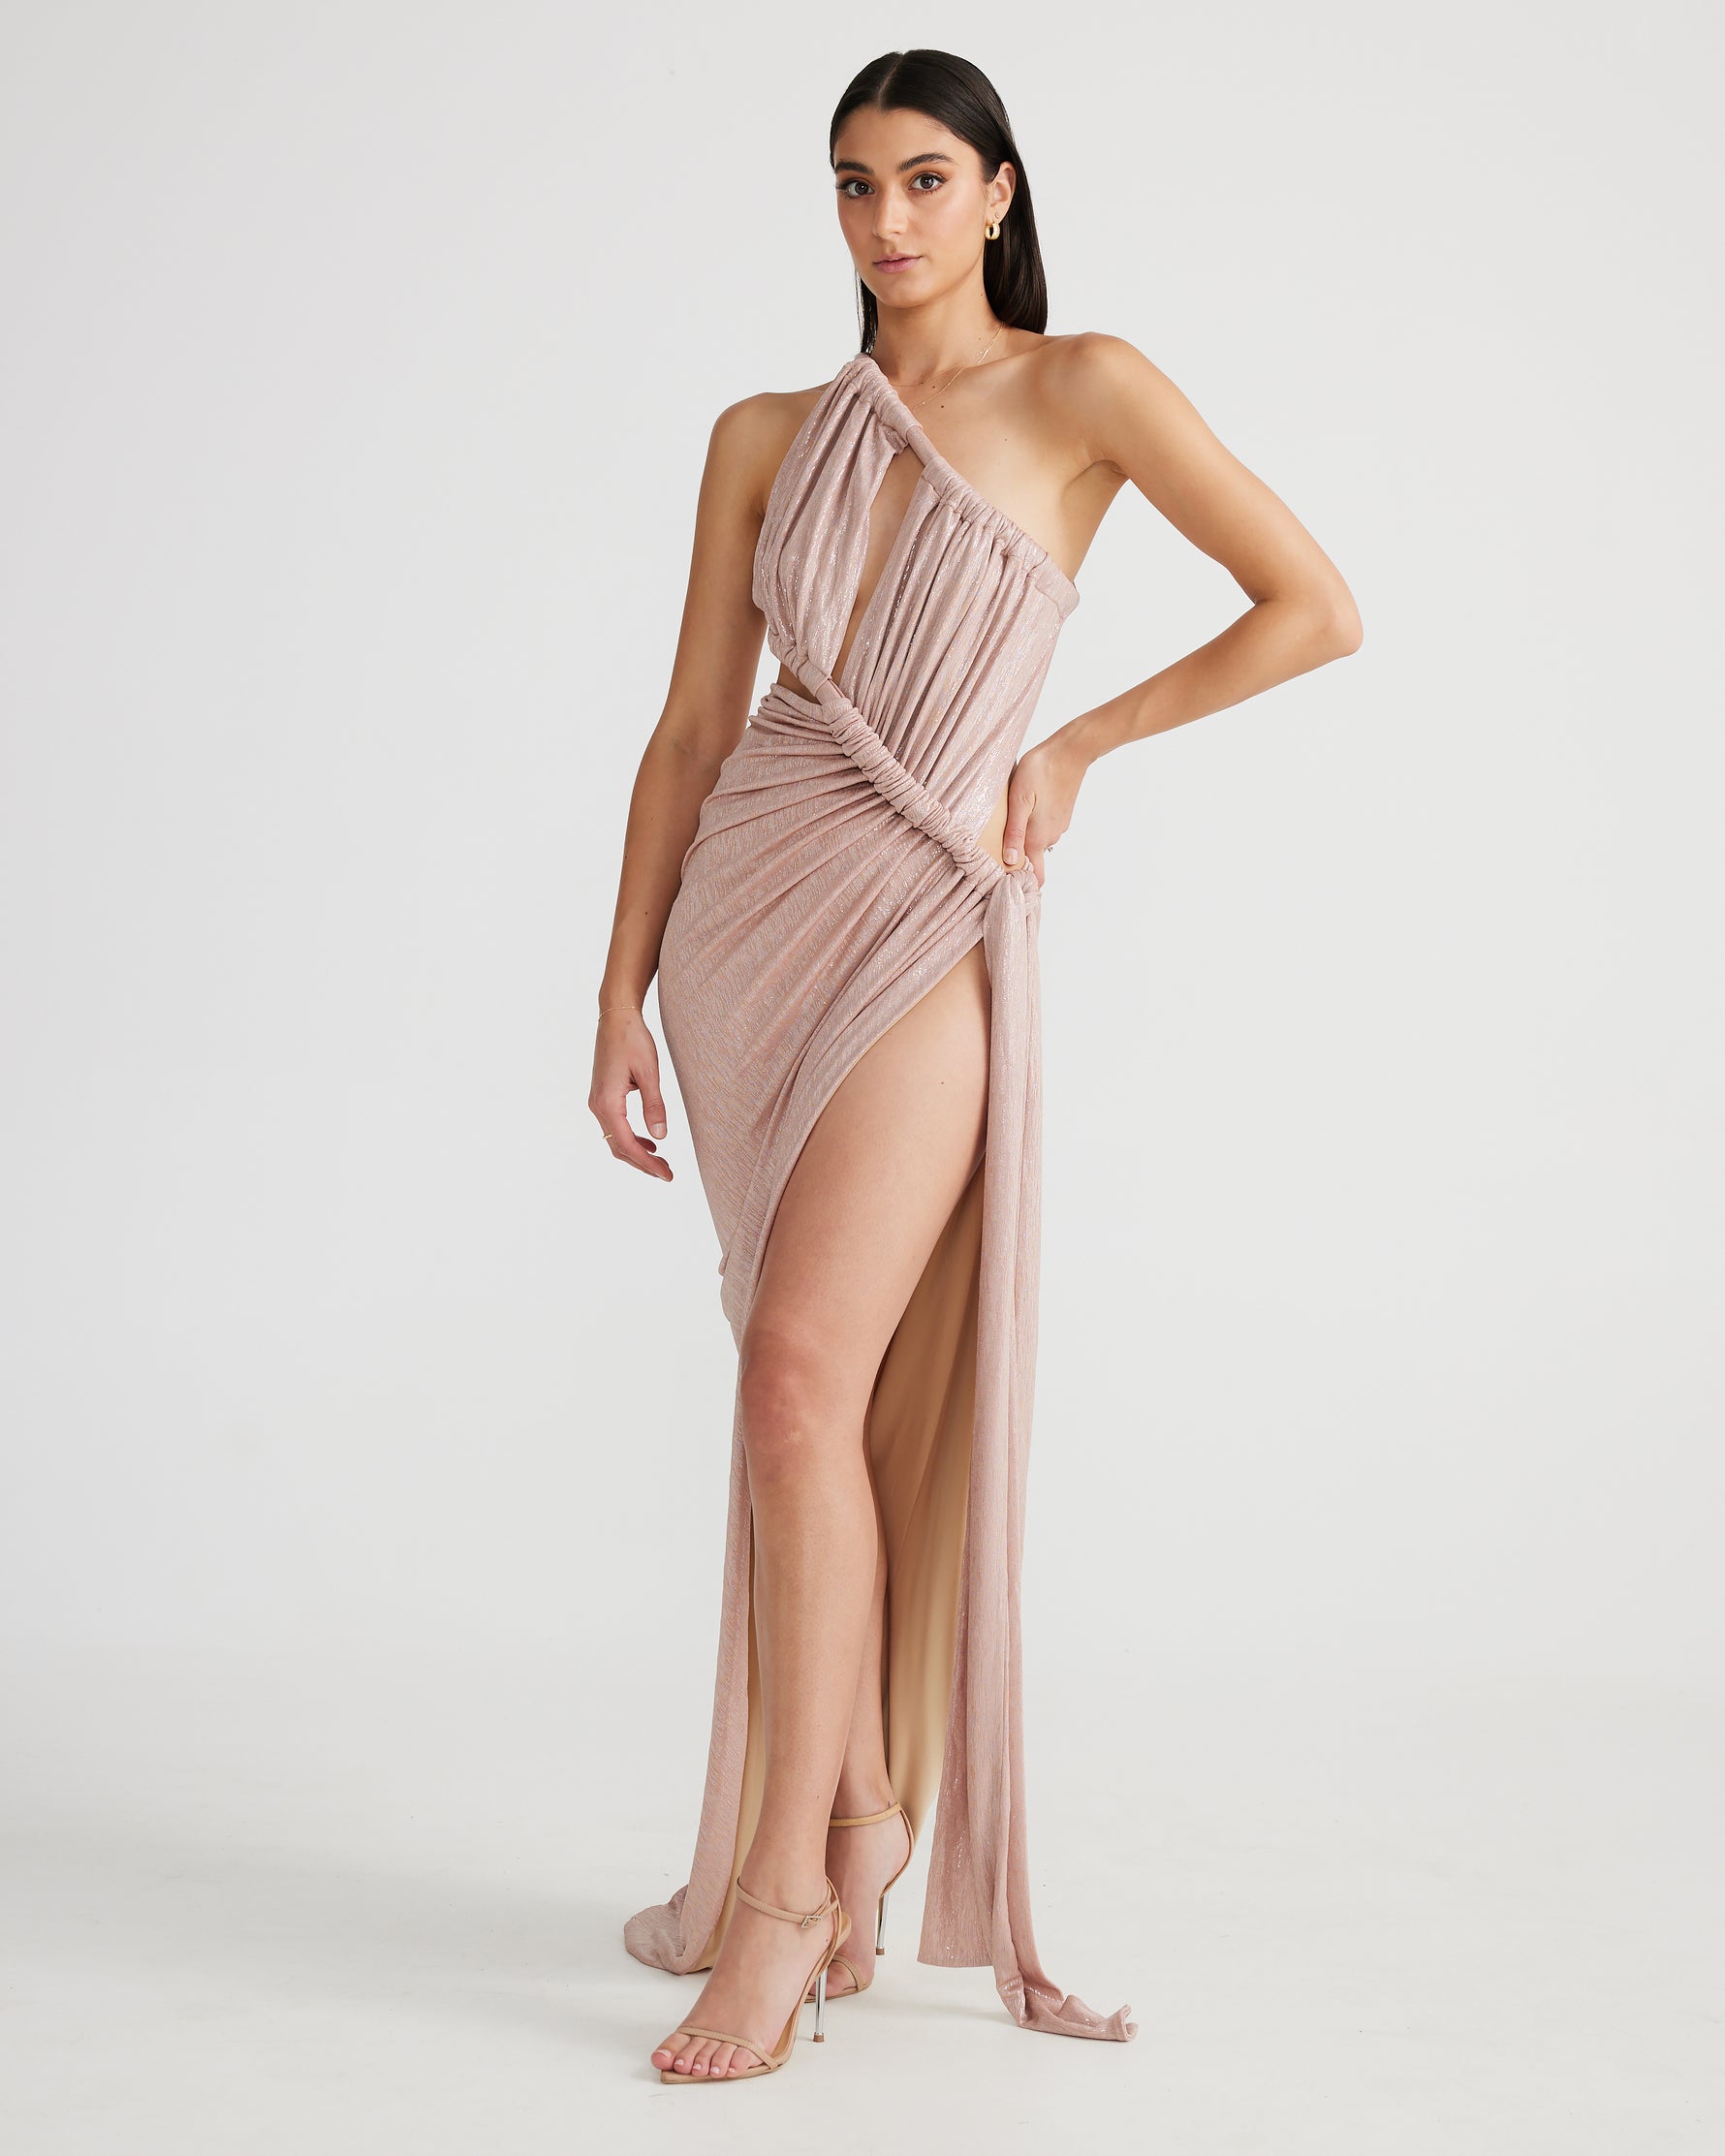 APHRODITE GOWN - ROSE GOLD